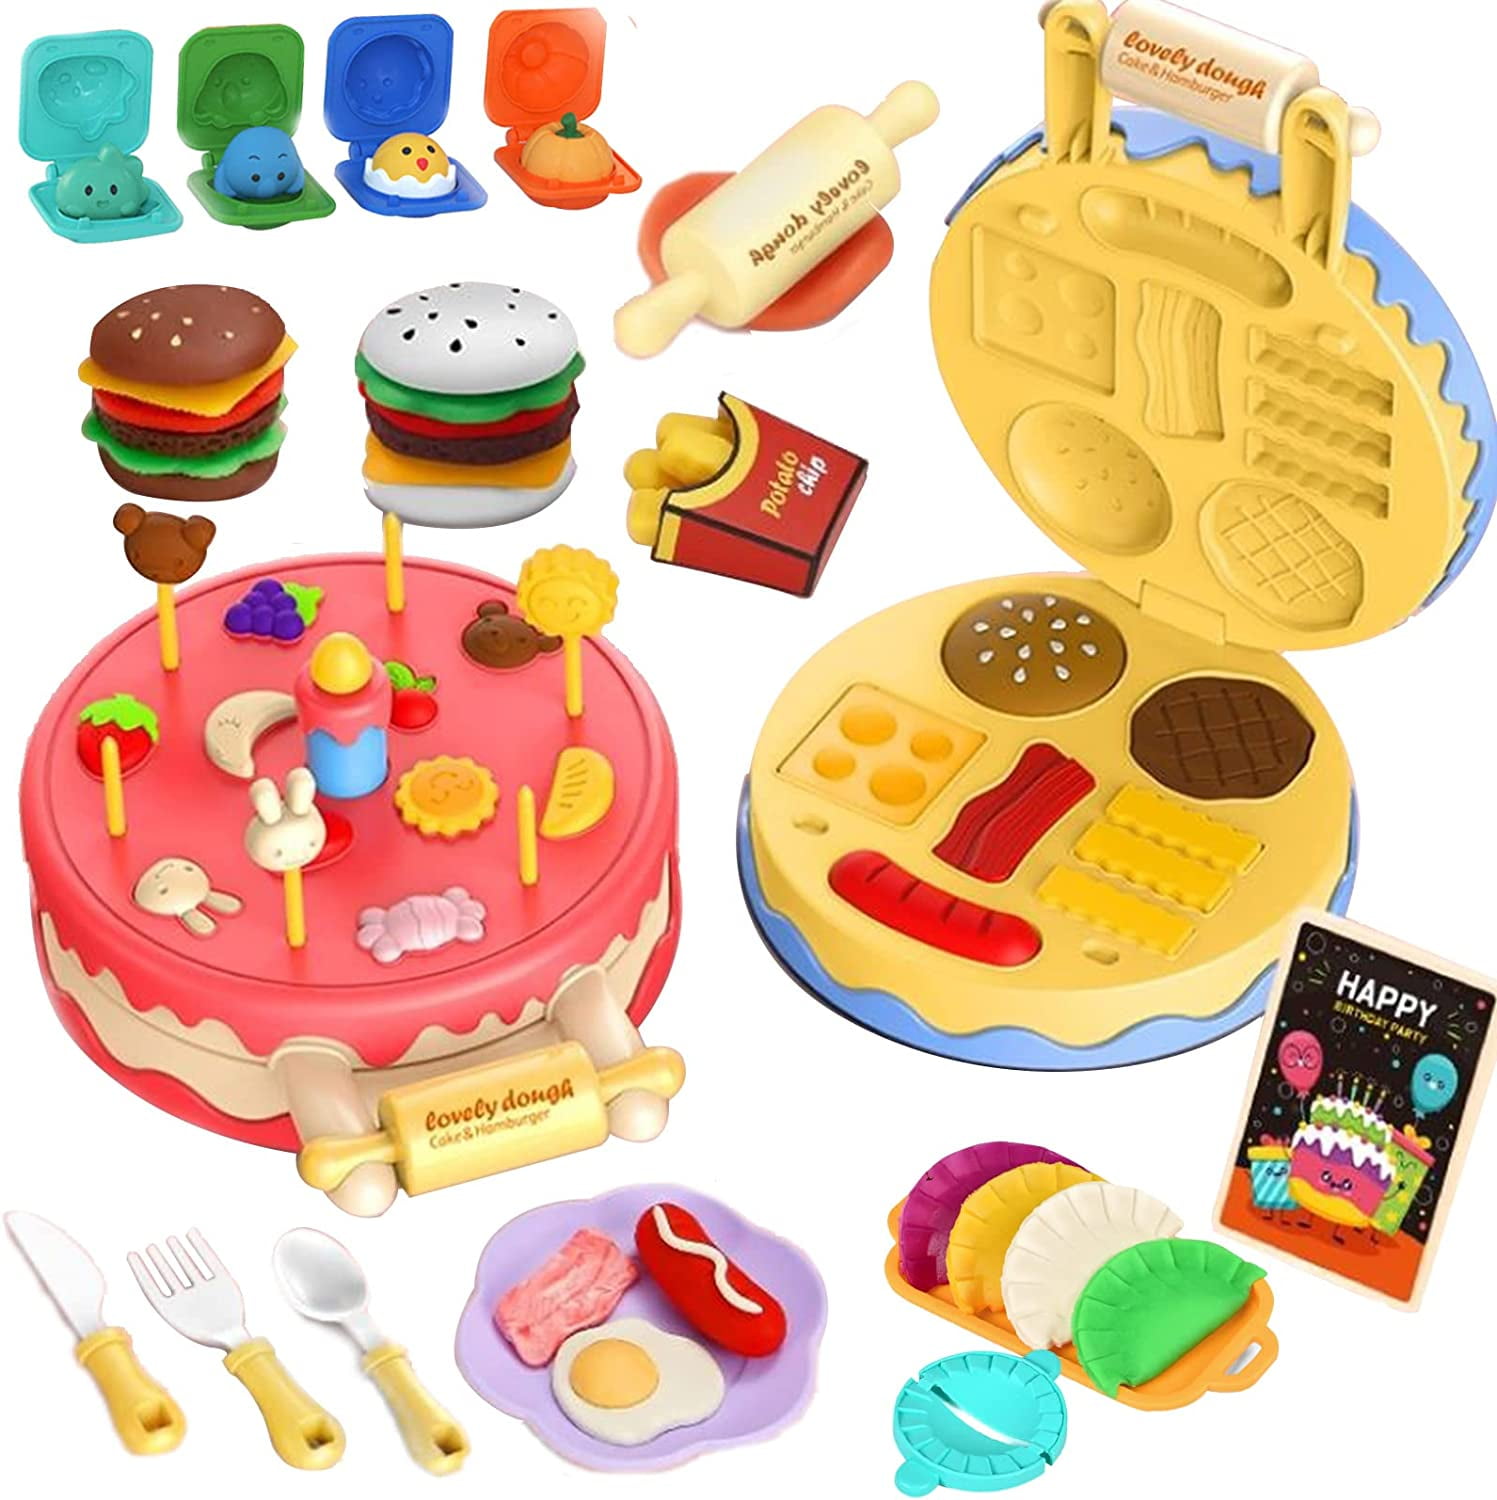  MAYESAR Playdough Set,Playdough Tools,Playdough Hamburger Set  with 25 PCS Play Dough Accessories and Play Clay Sets with 12 Colors Dough  for 3 4 5 6 Years Old Boys and Girls Birthday